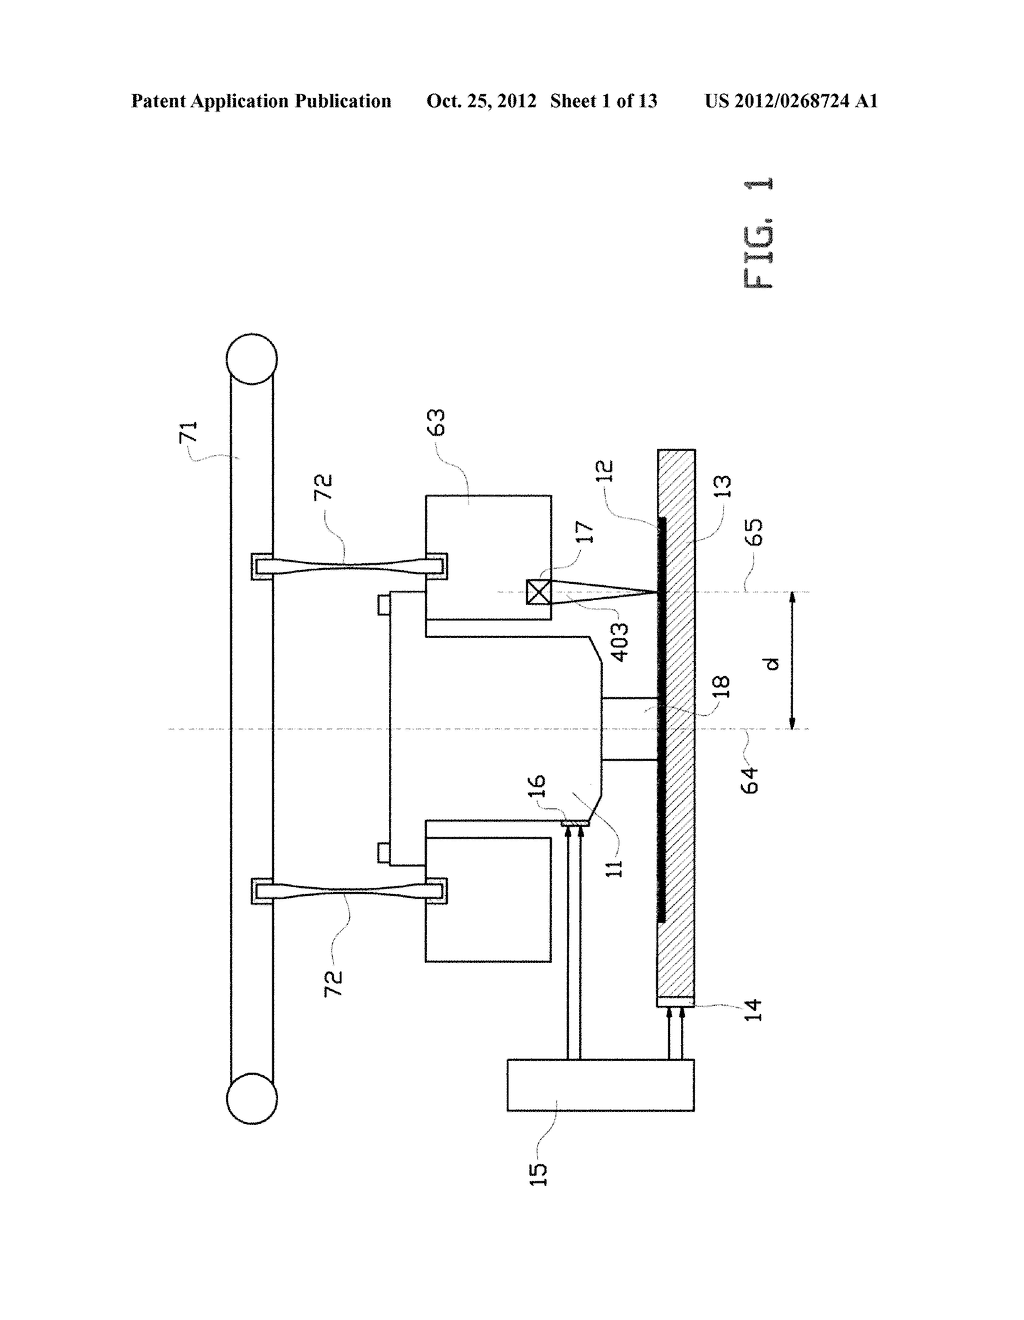 LITHOGRAPHY SYSTEM FOR PROCESSING A TARGET, SUCH AS A WAFER, A METHOD FOR     OPERATING A LITHOGRAPHY SYSTEM FOR PROCESSING A TARGET, SUCH AS A WAFER     AND A SUBSTRATE FOR USE IN SUCH A LITHOGRAPHY SYSTEM - diagram, schematic, and image 02